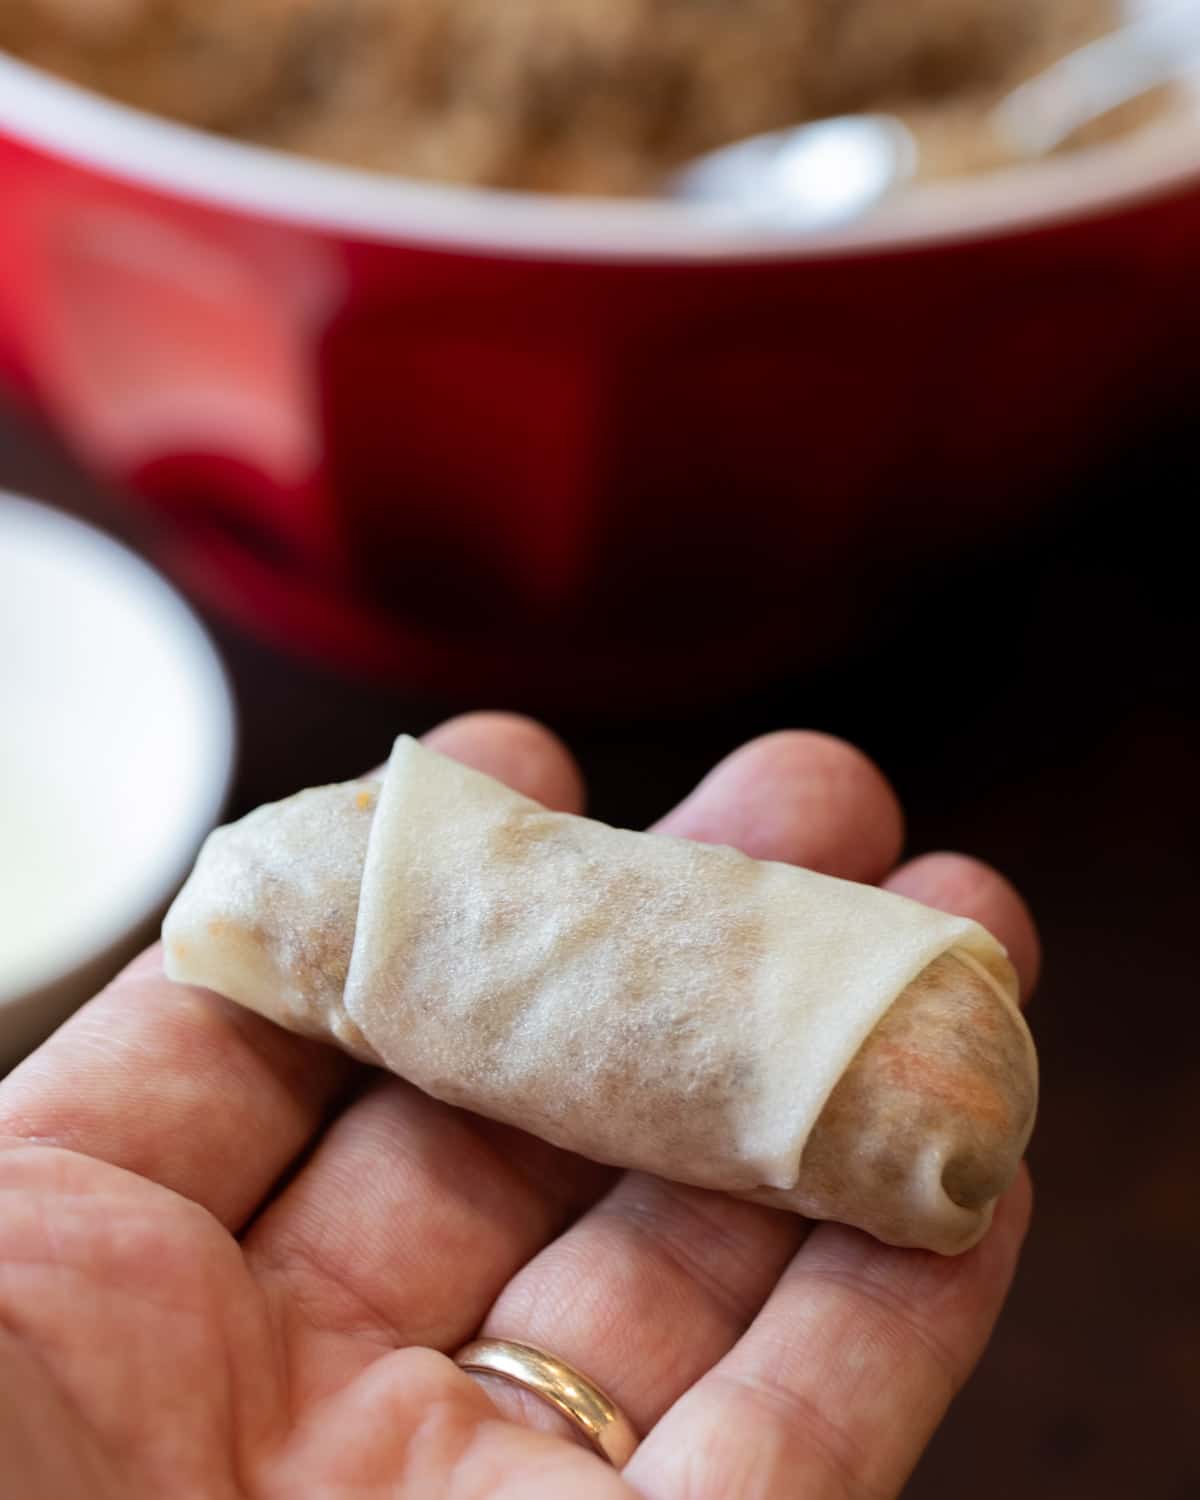 A pork lumpia being held in a hand.